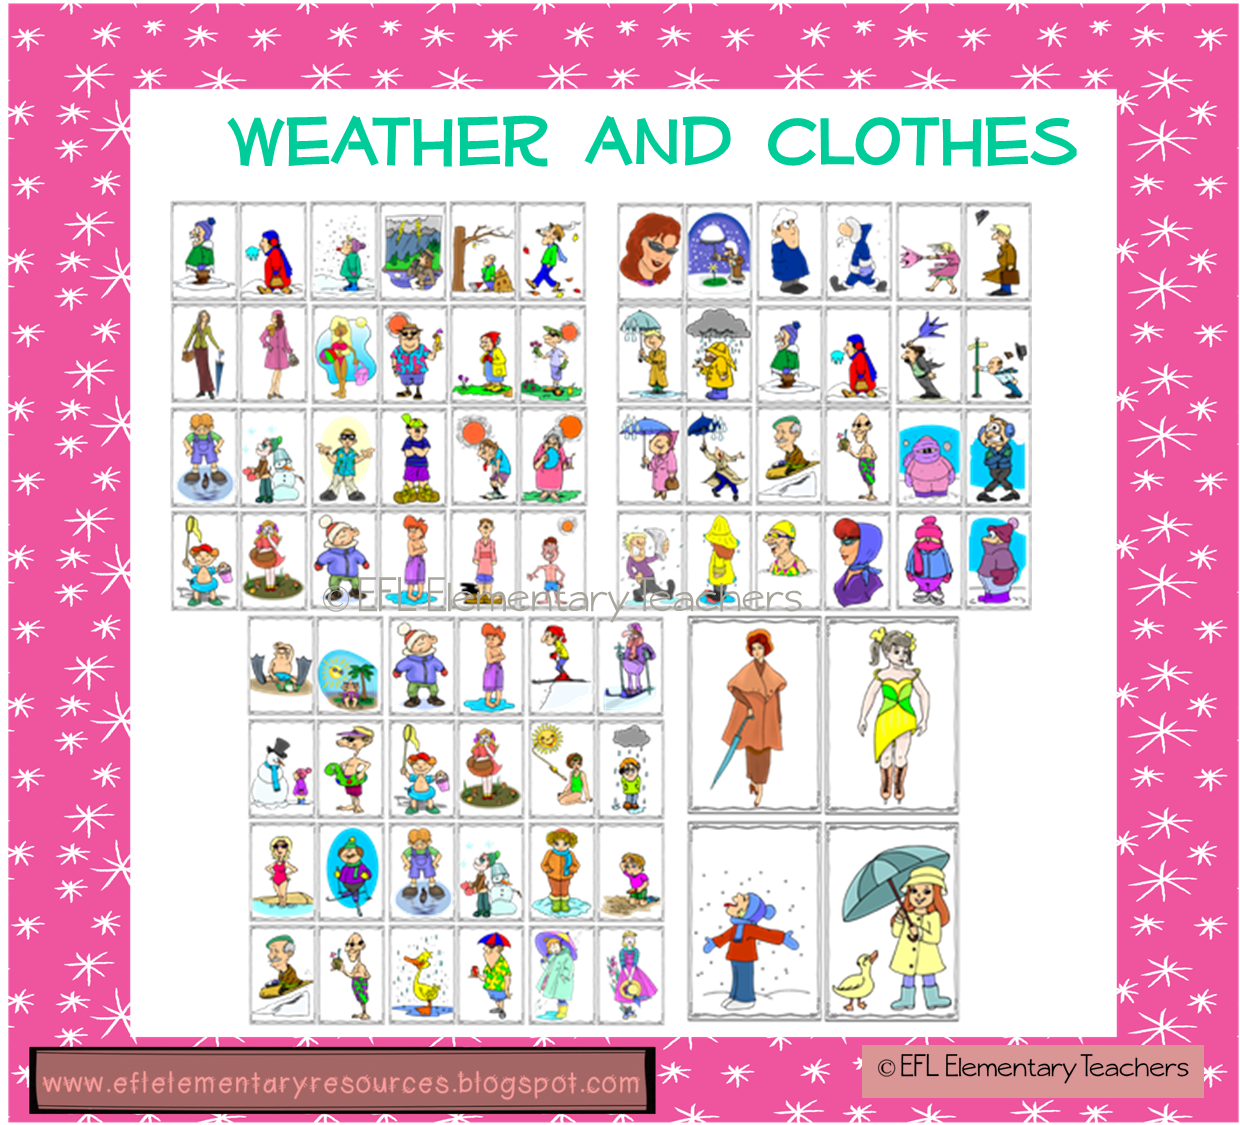 Efl Elementary Teachers Weather And Clothes Themes For The Esl